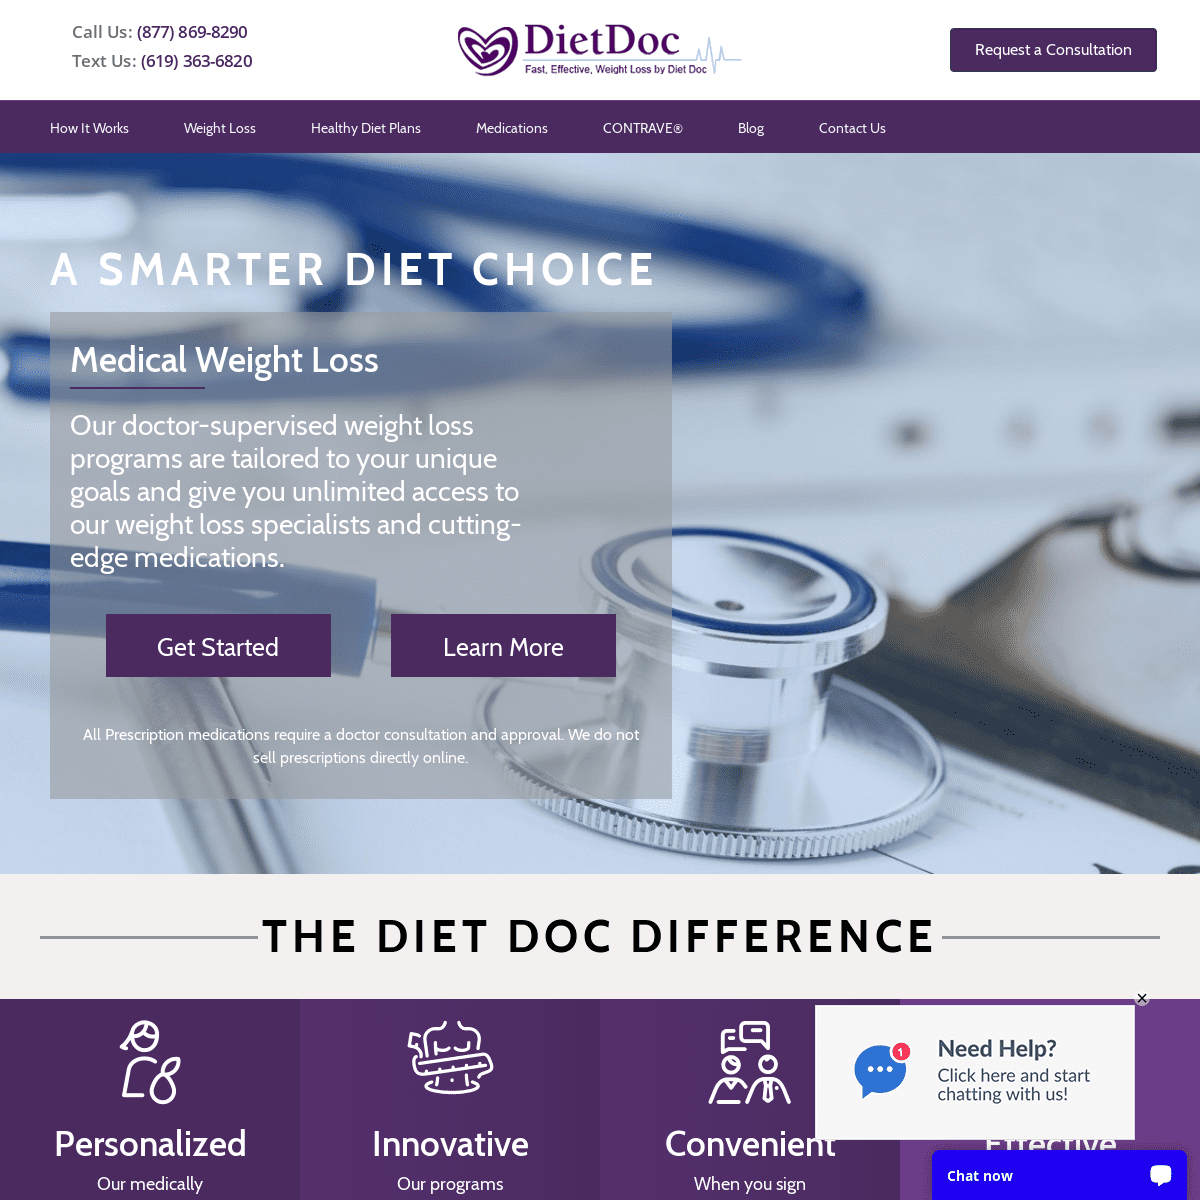 A complete backup of dietdoc.com